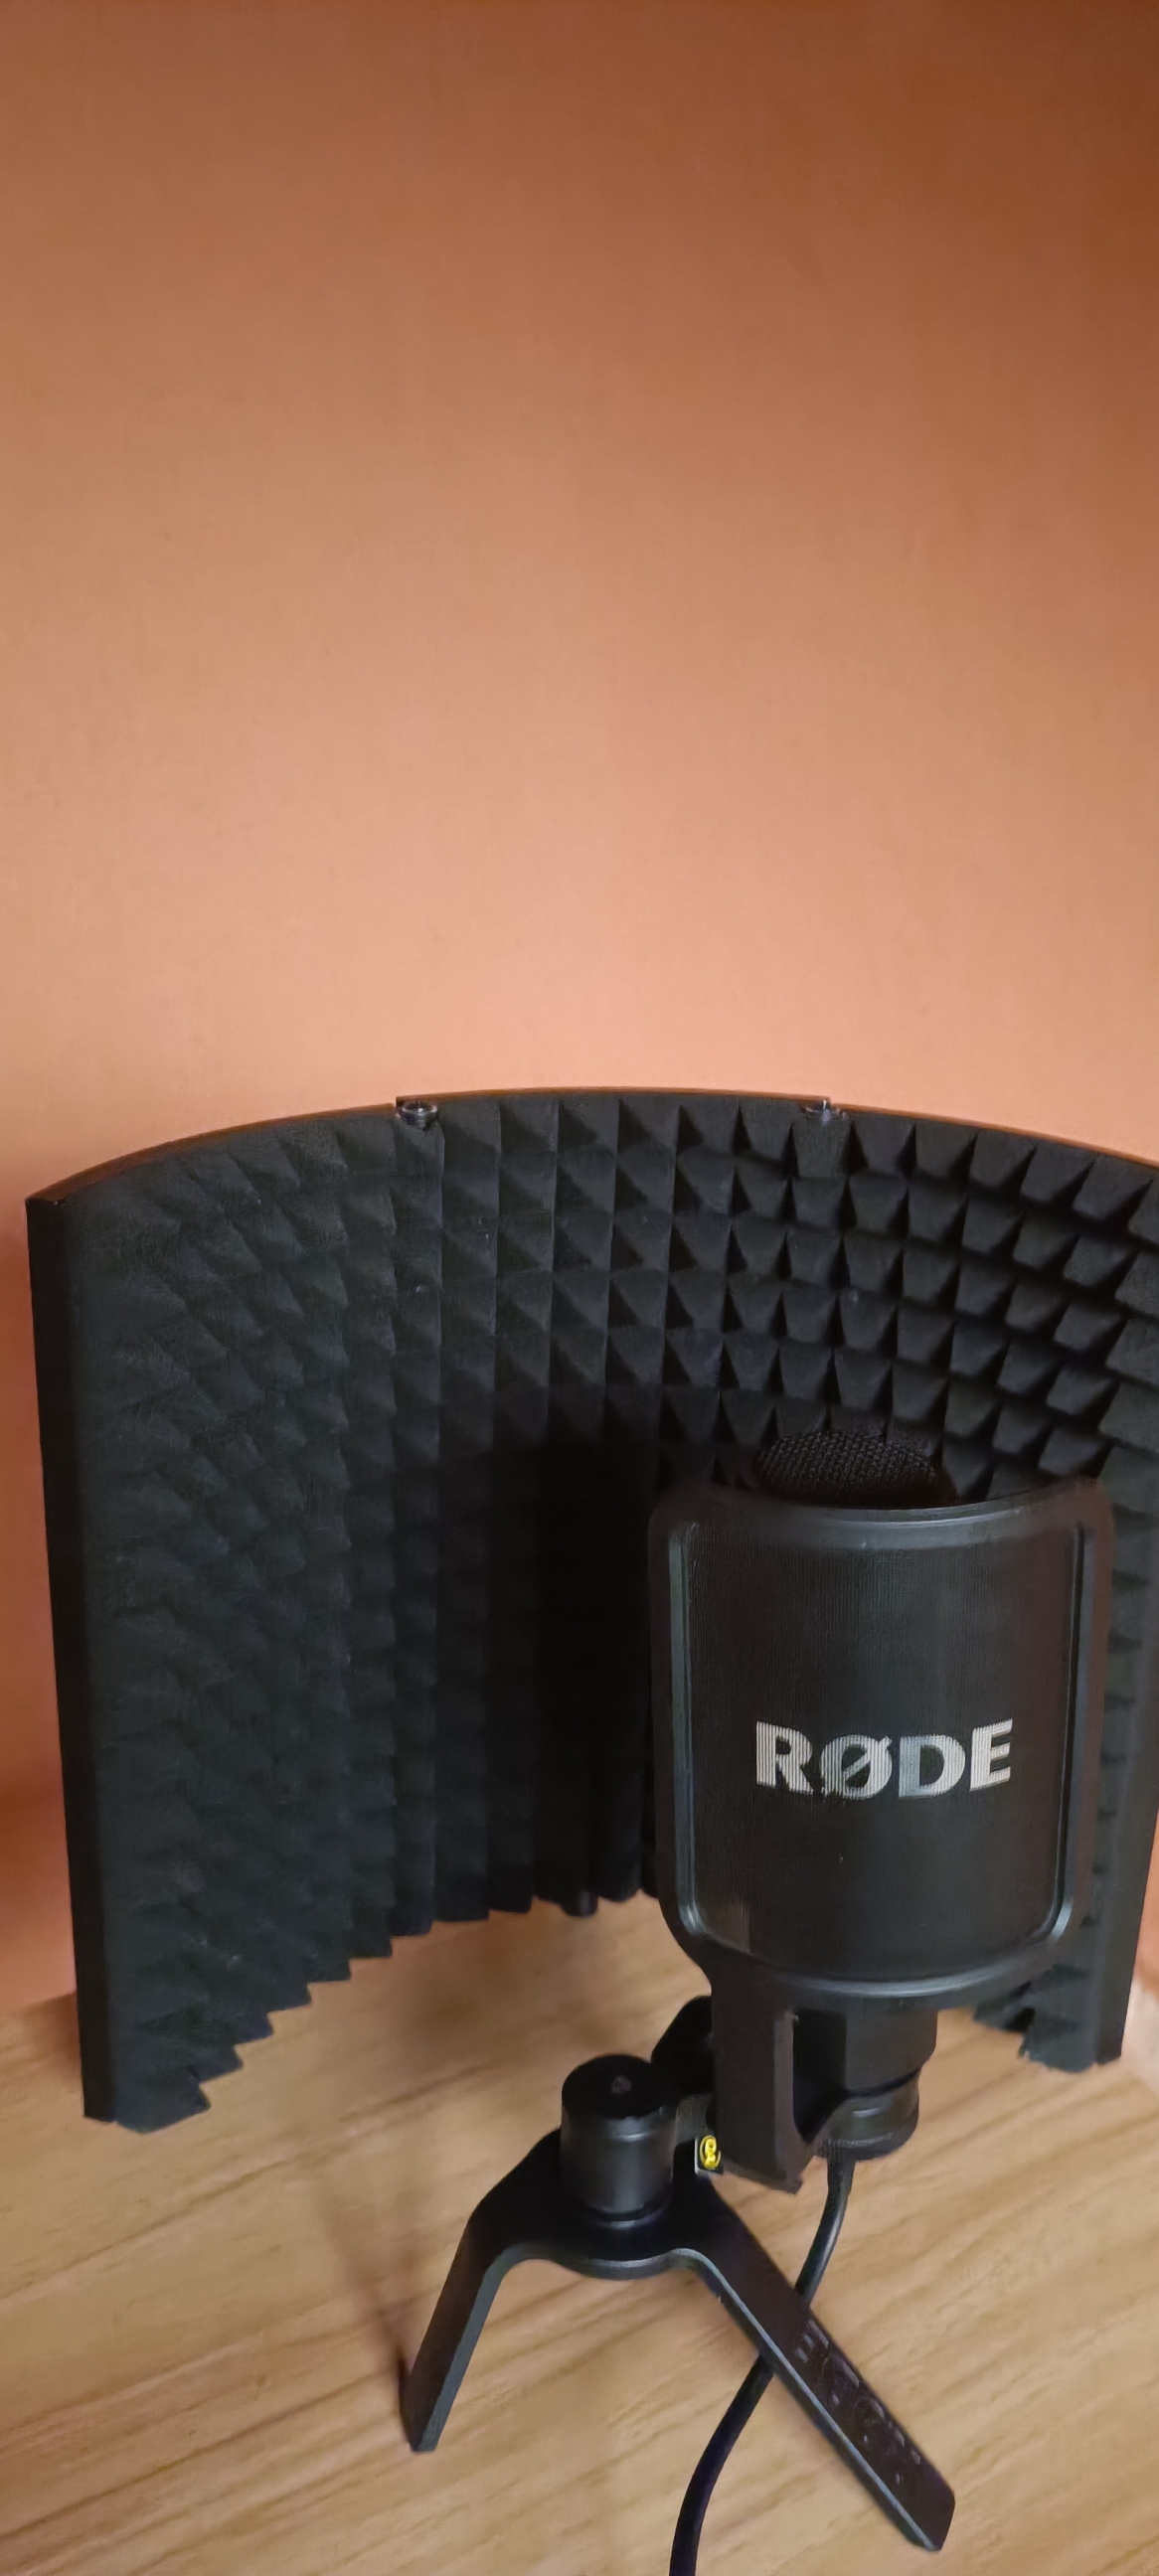 Rode NT USB+ Microphone is available at Efritin